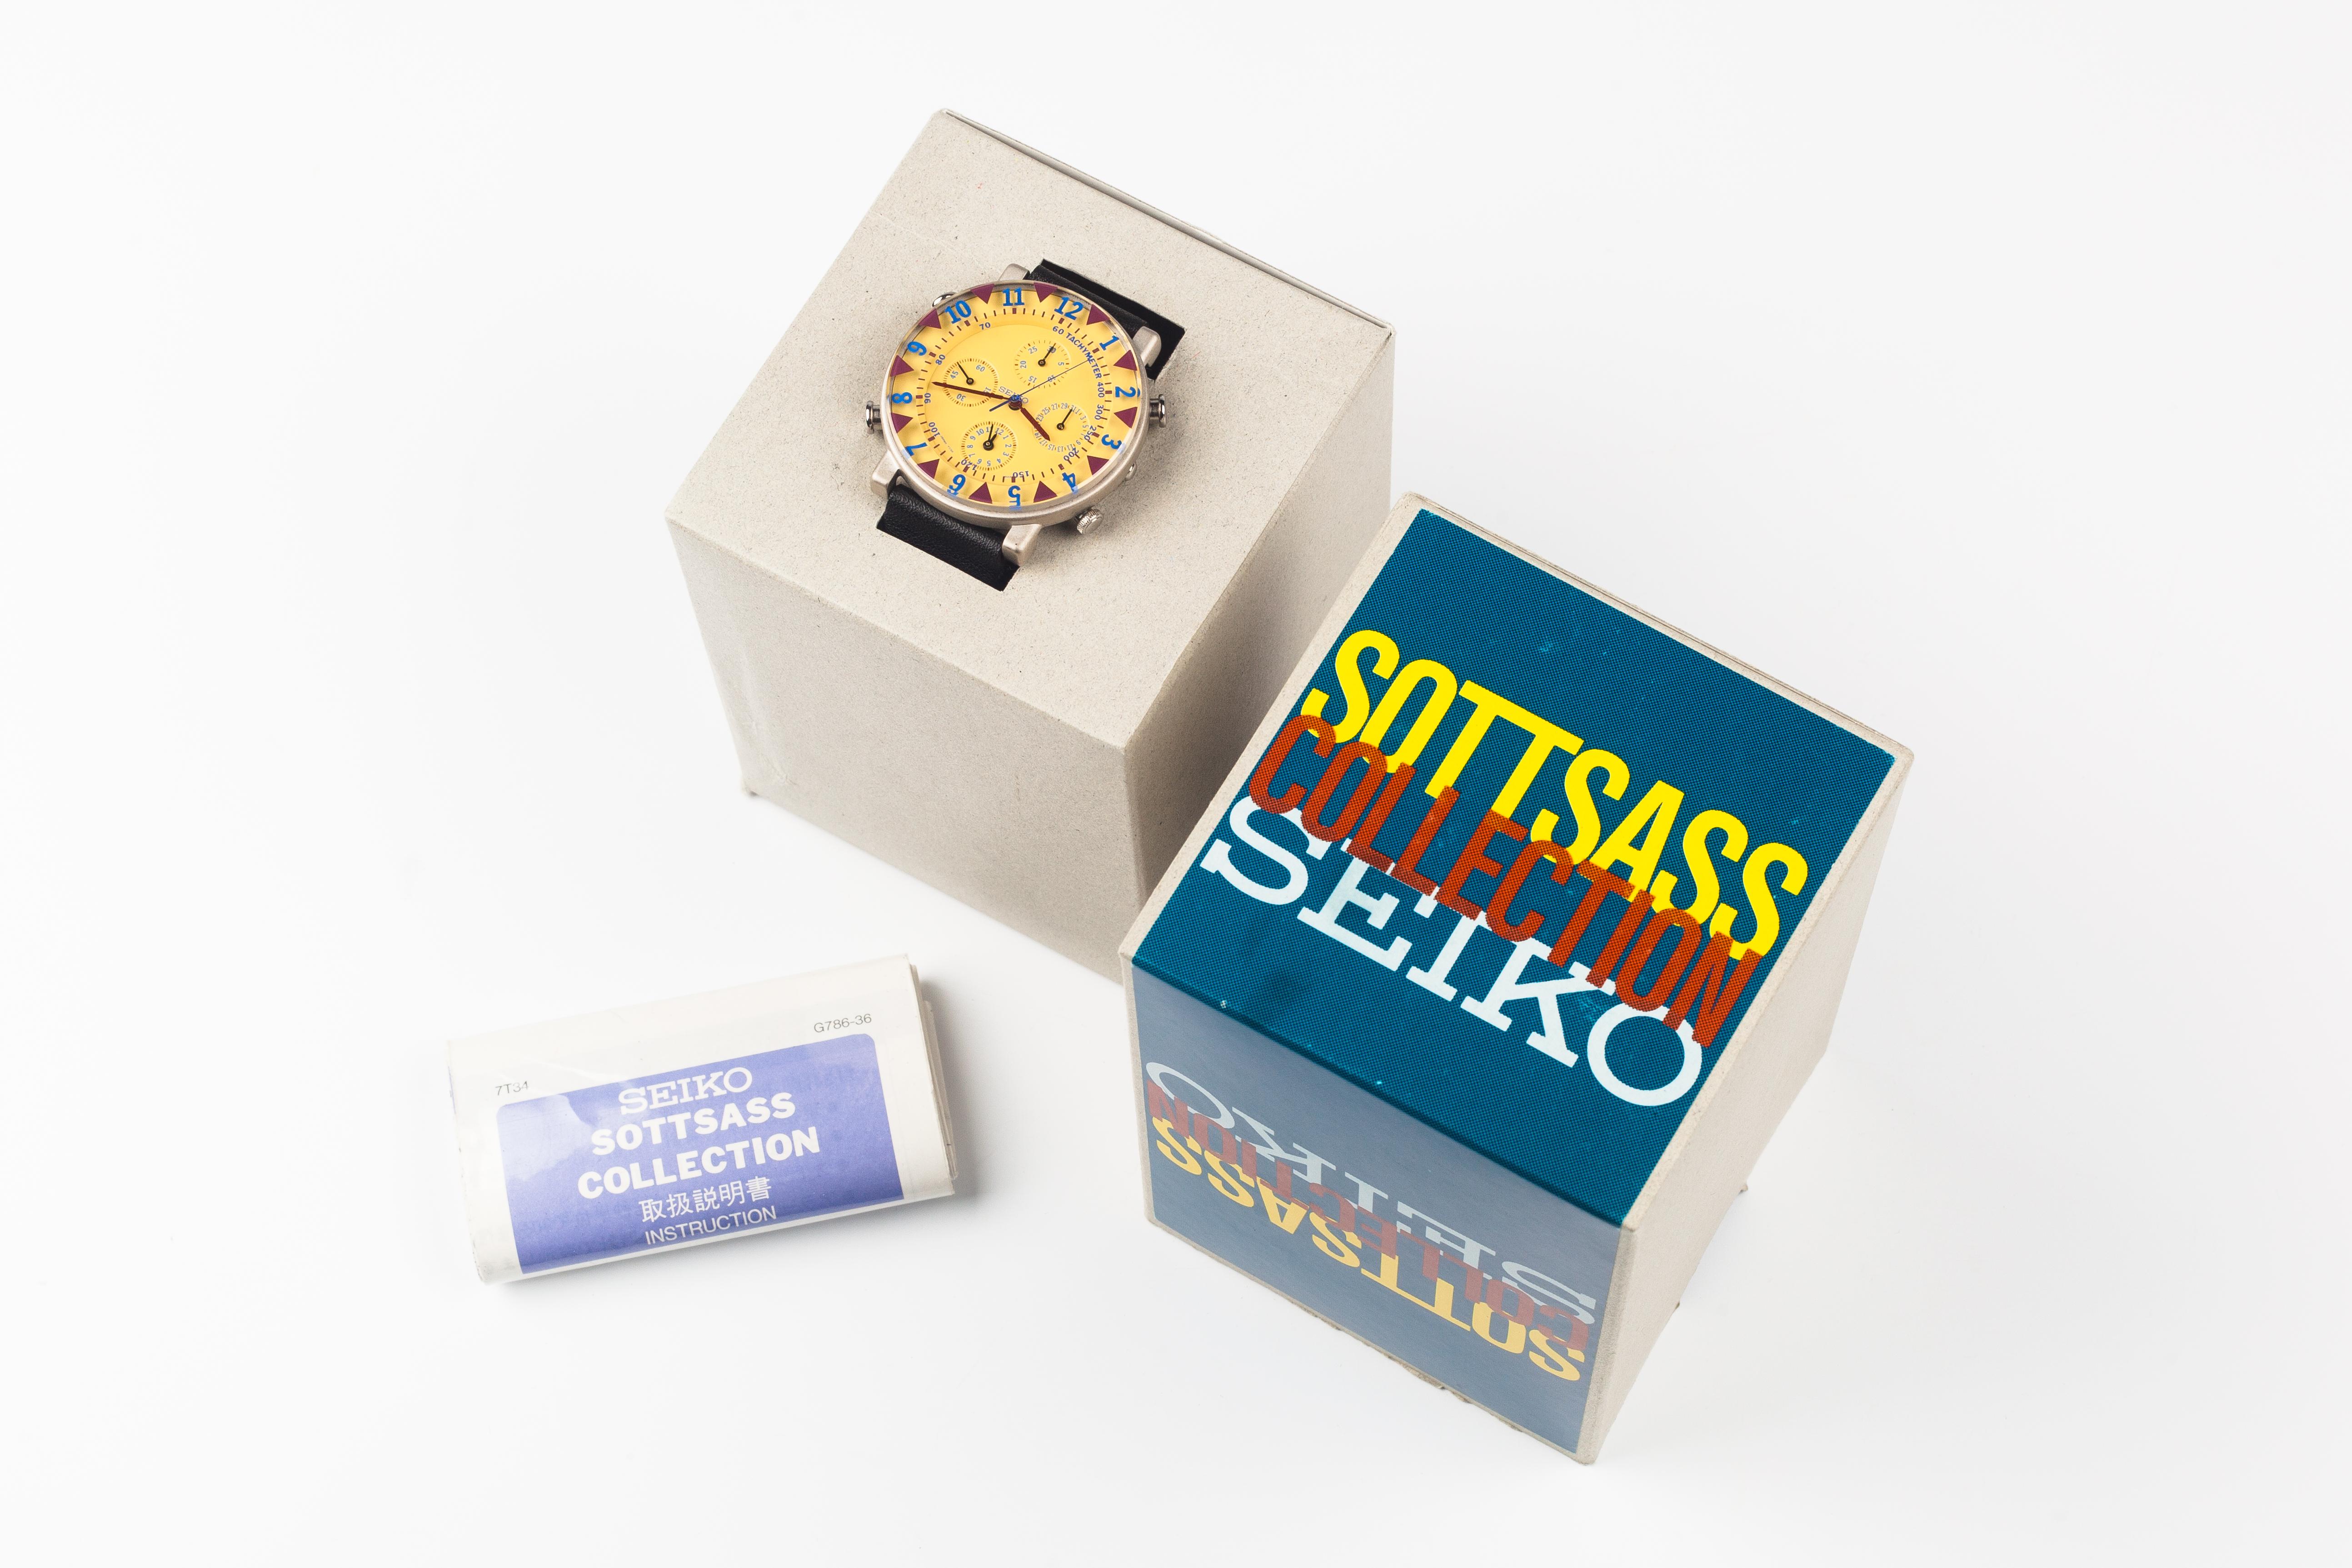 First edition, out-of-production Sottsass collection wristwatches designed by Ettore Sottsass, released exclusively in Japan by Seiko in 1992. Production of this collection was limited to a small number due to the highly skilled and meticulous